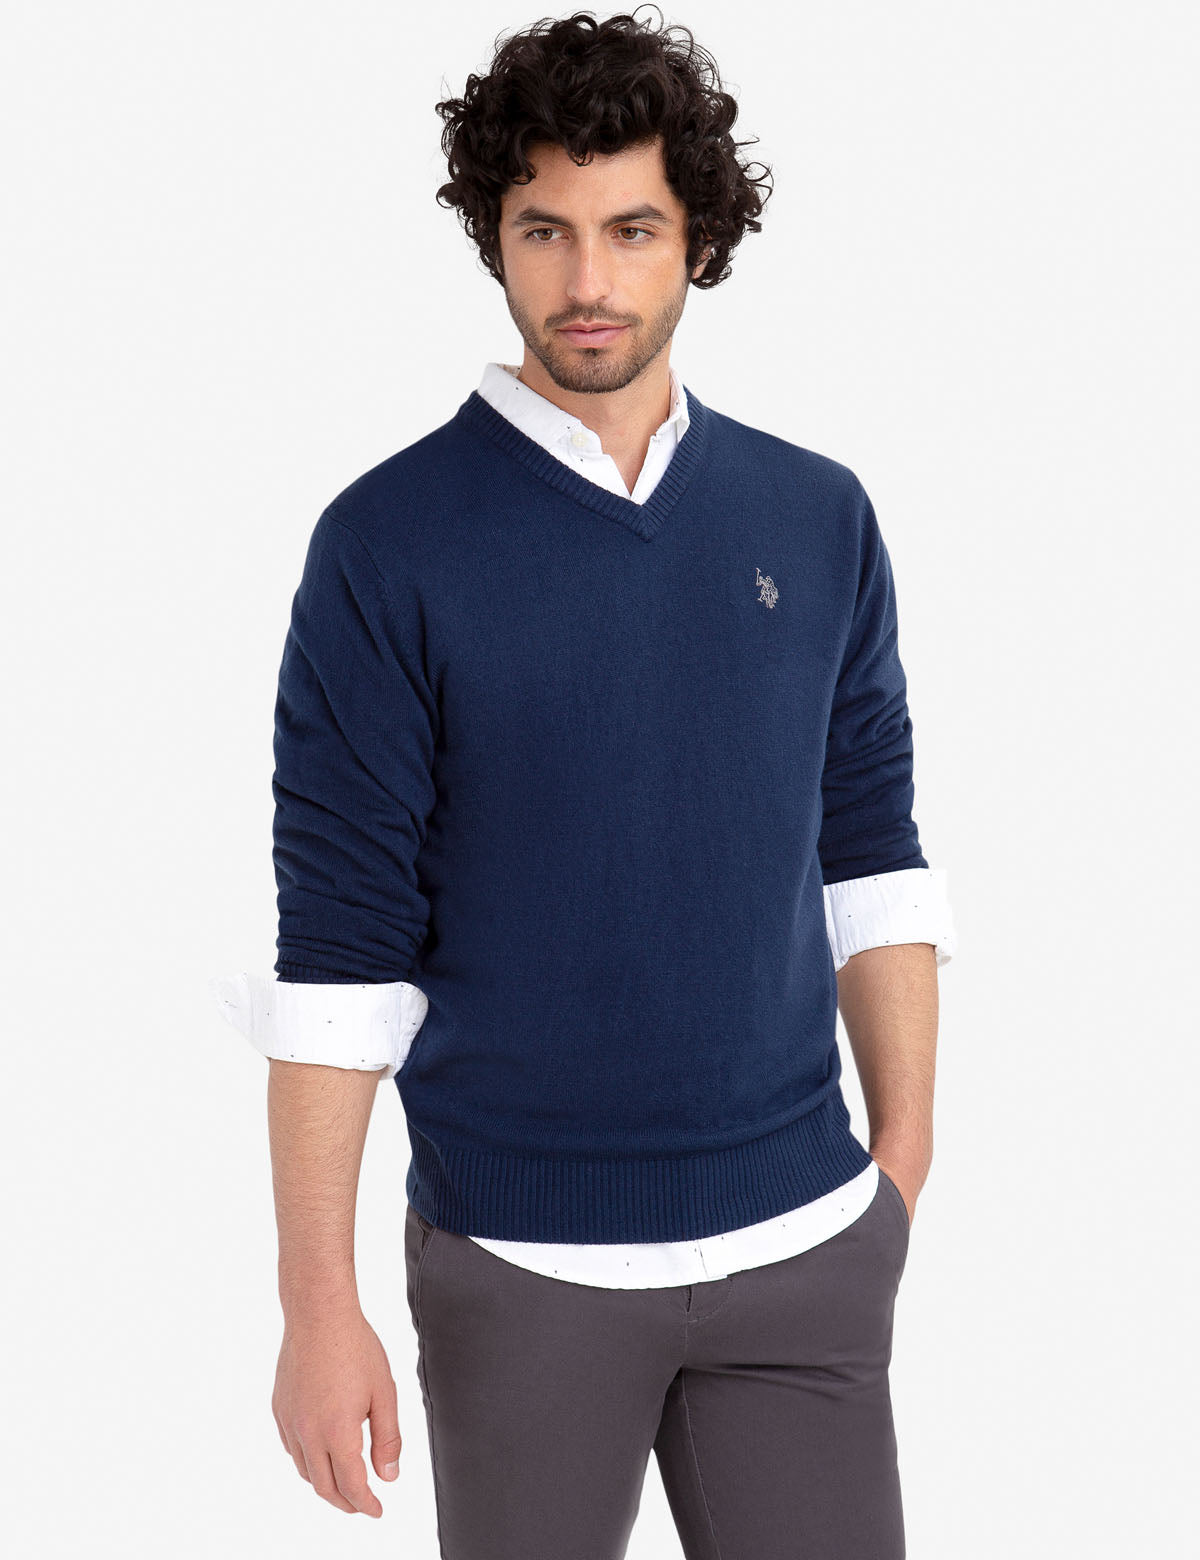 v neck sweater and polo shirt